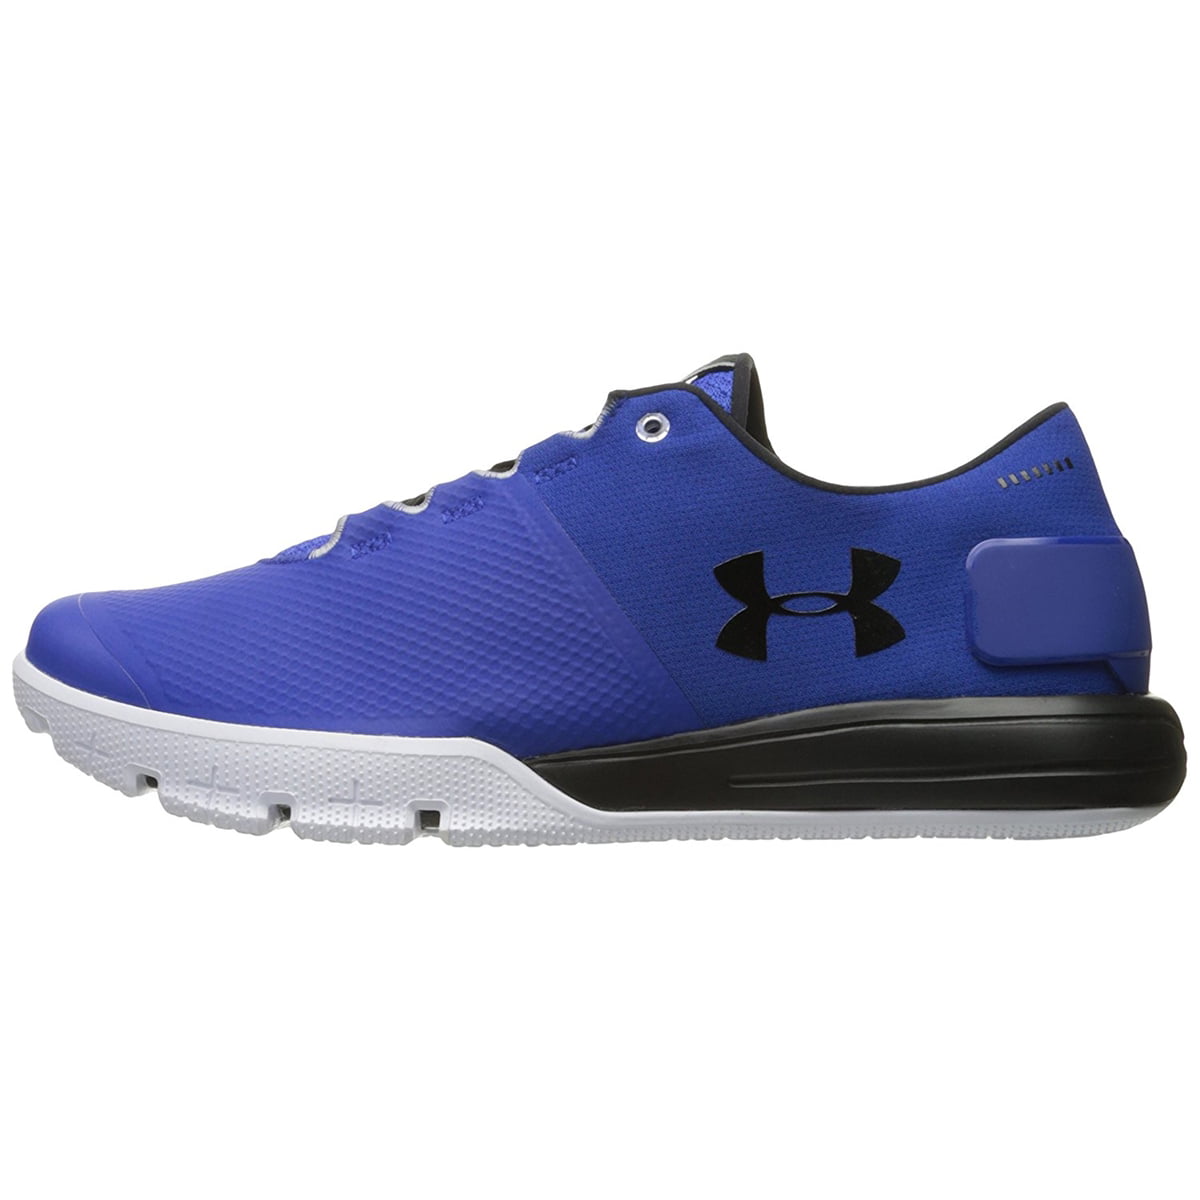 Under Armour Men Charged Ultimate Tr 2.0 Shoes - Walmart.com